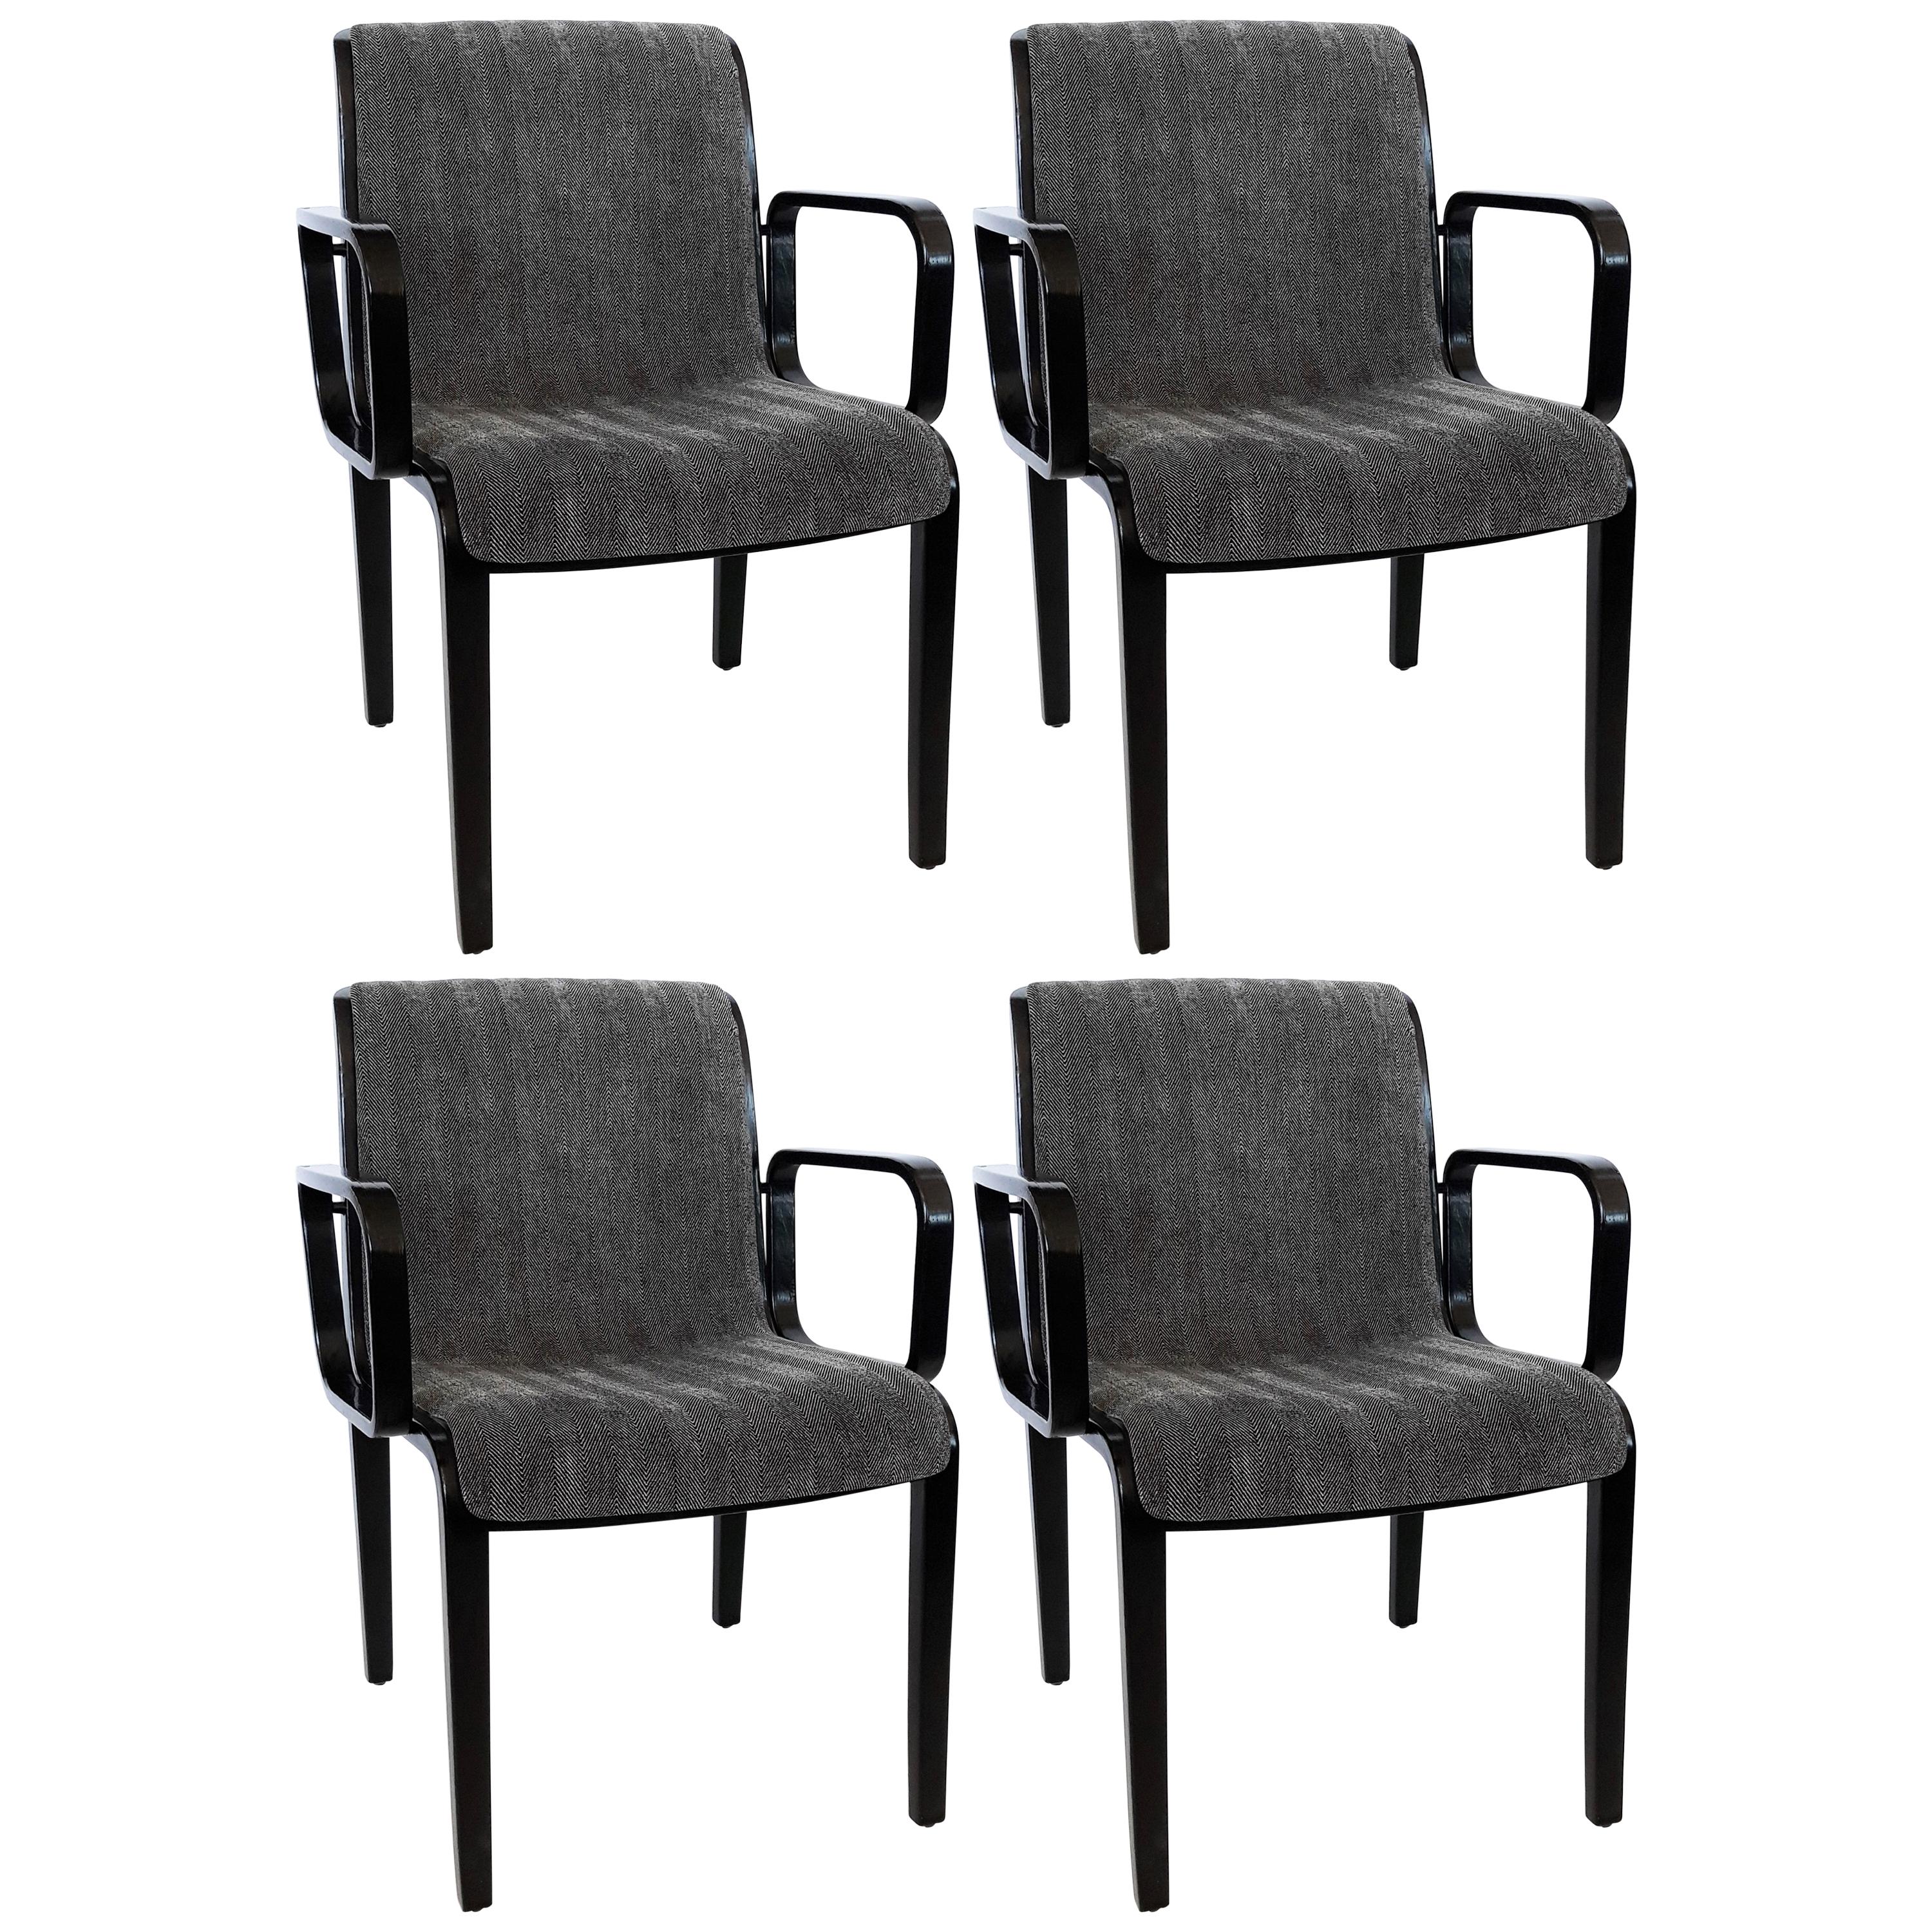 Four Bill Stephens For Knoll Black Lacquered Armchairs